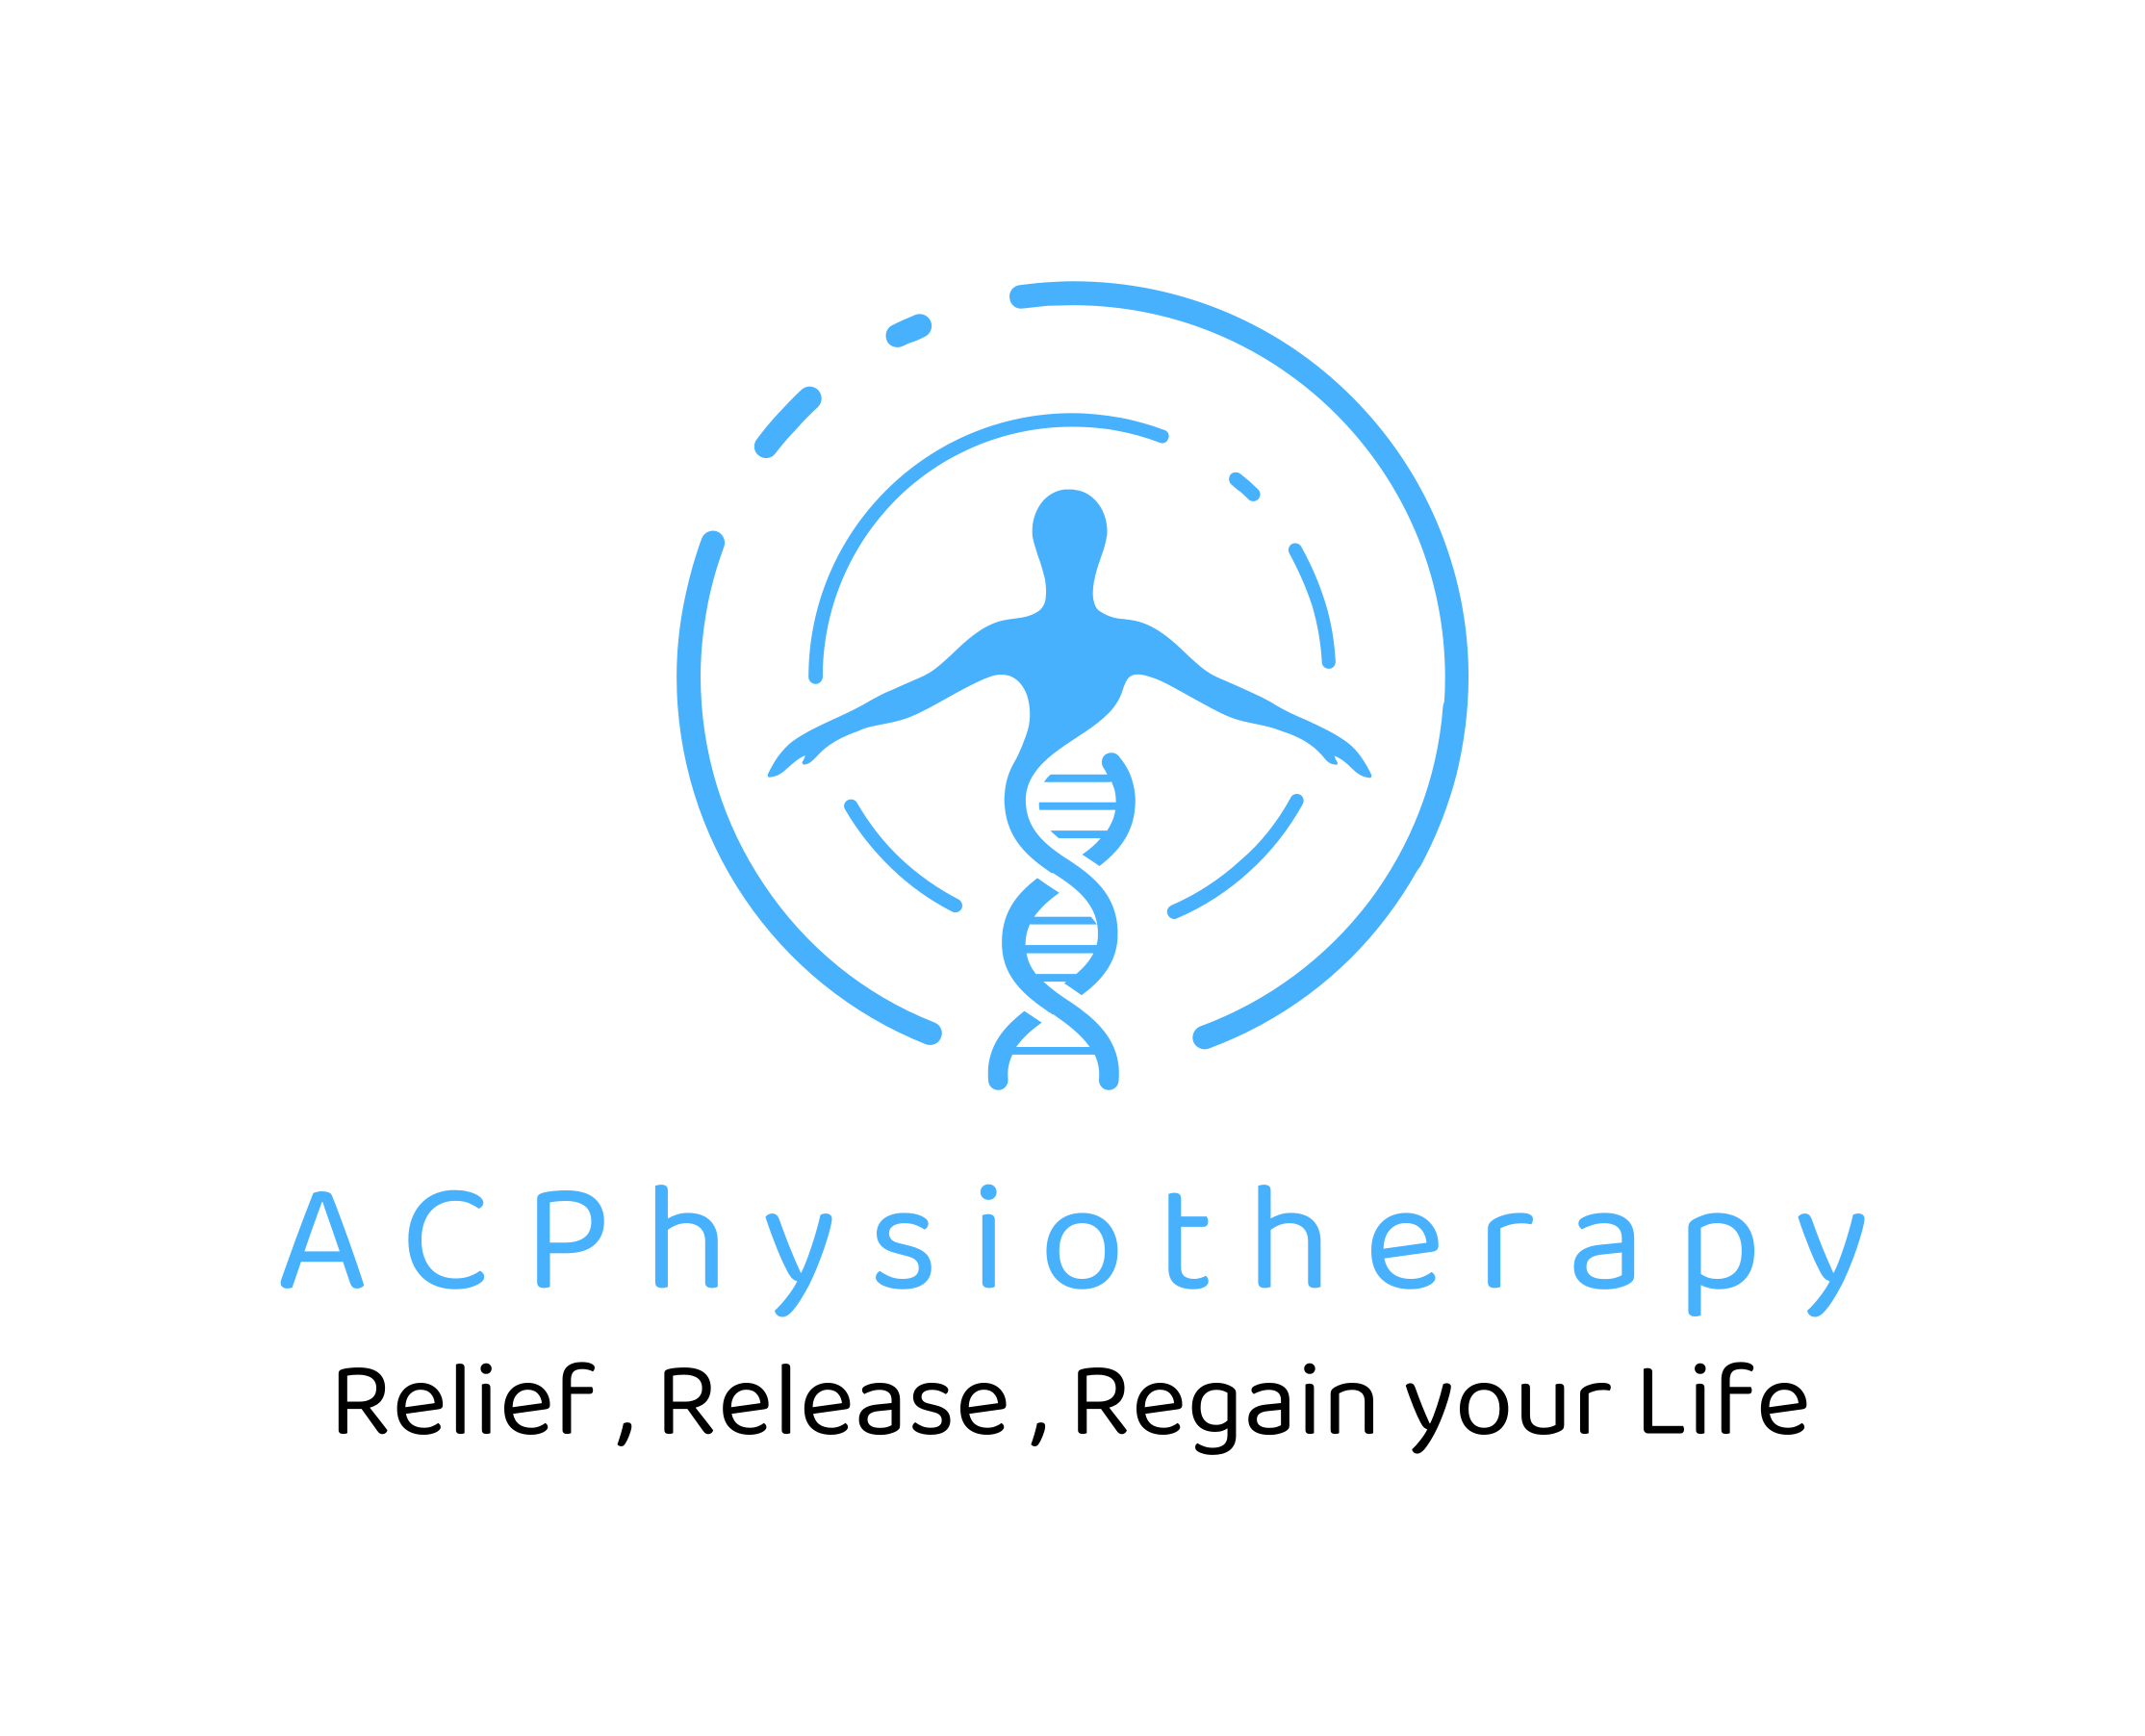 Logo of AC Physiotherapy